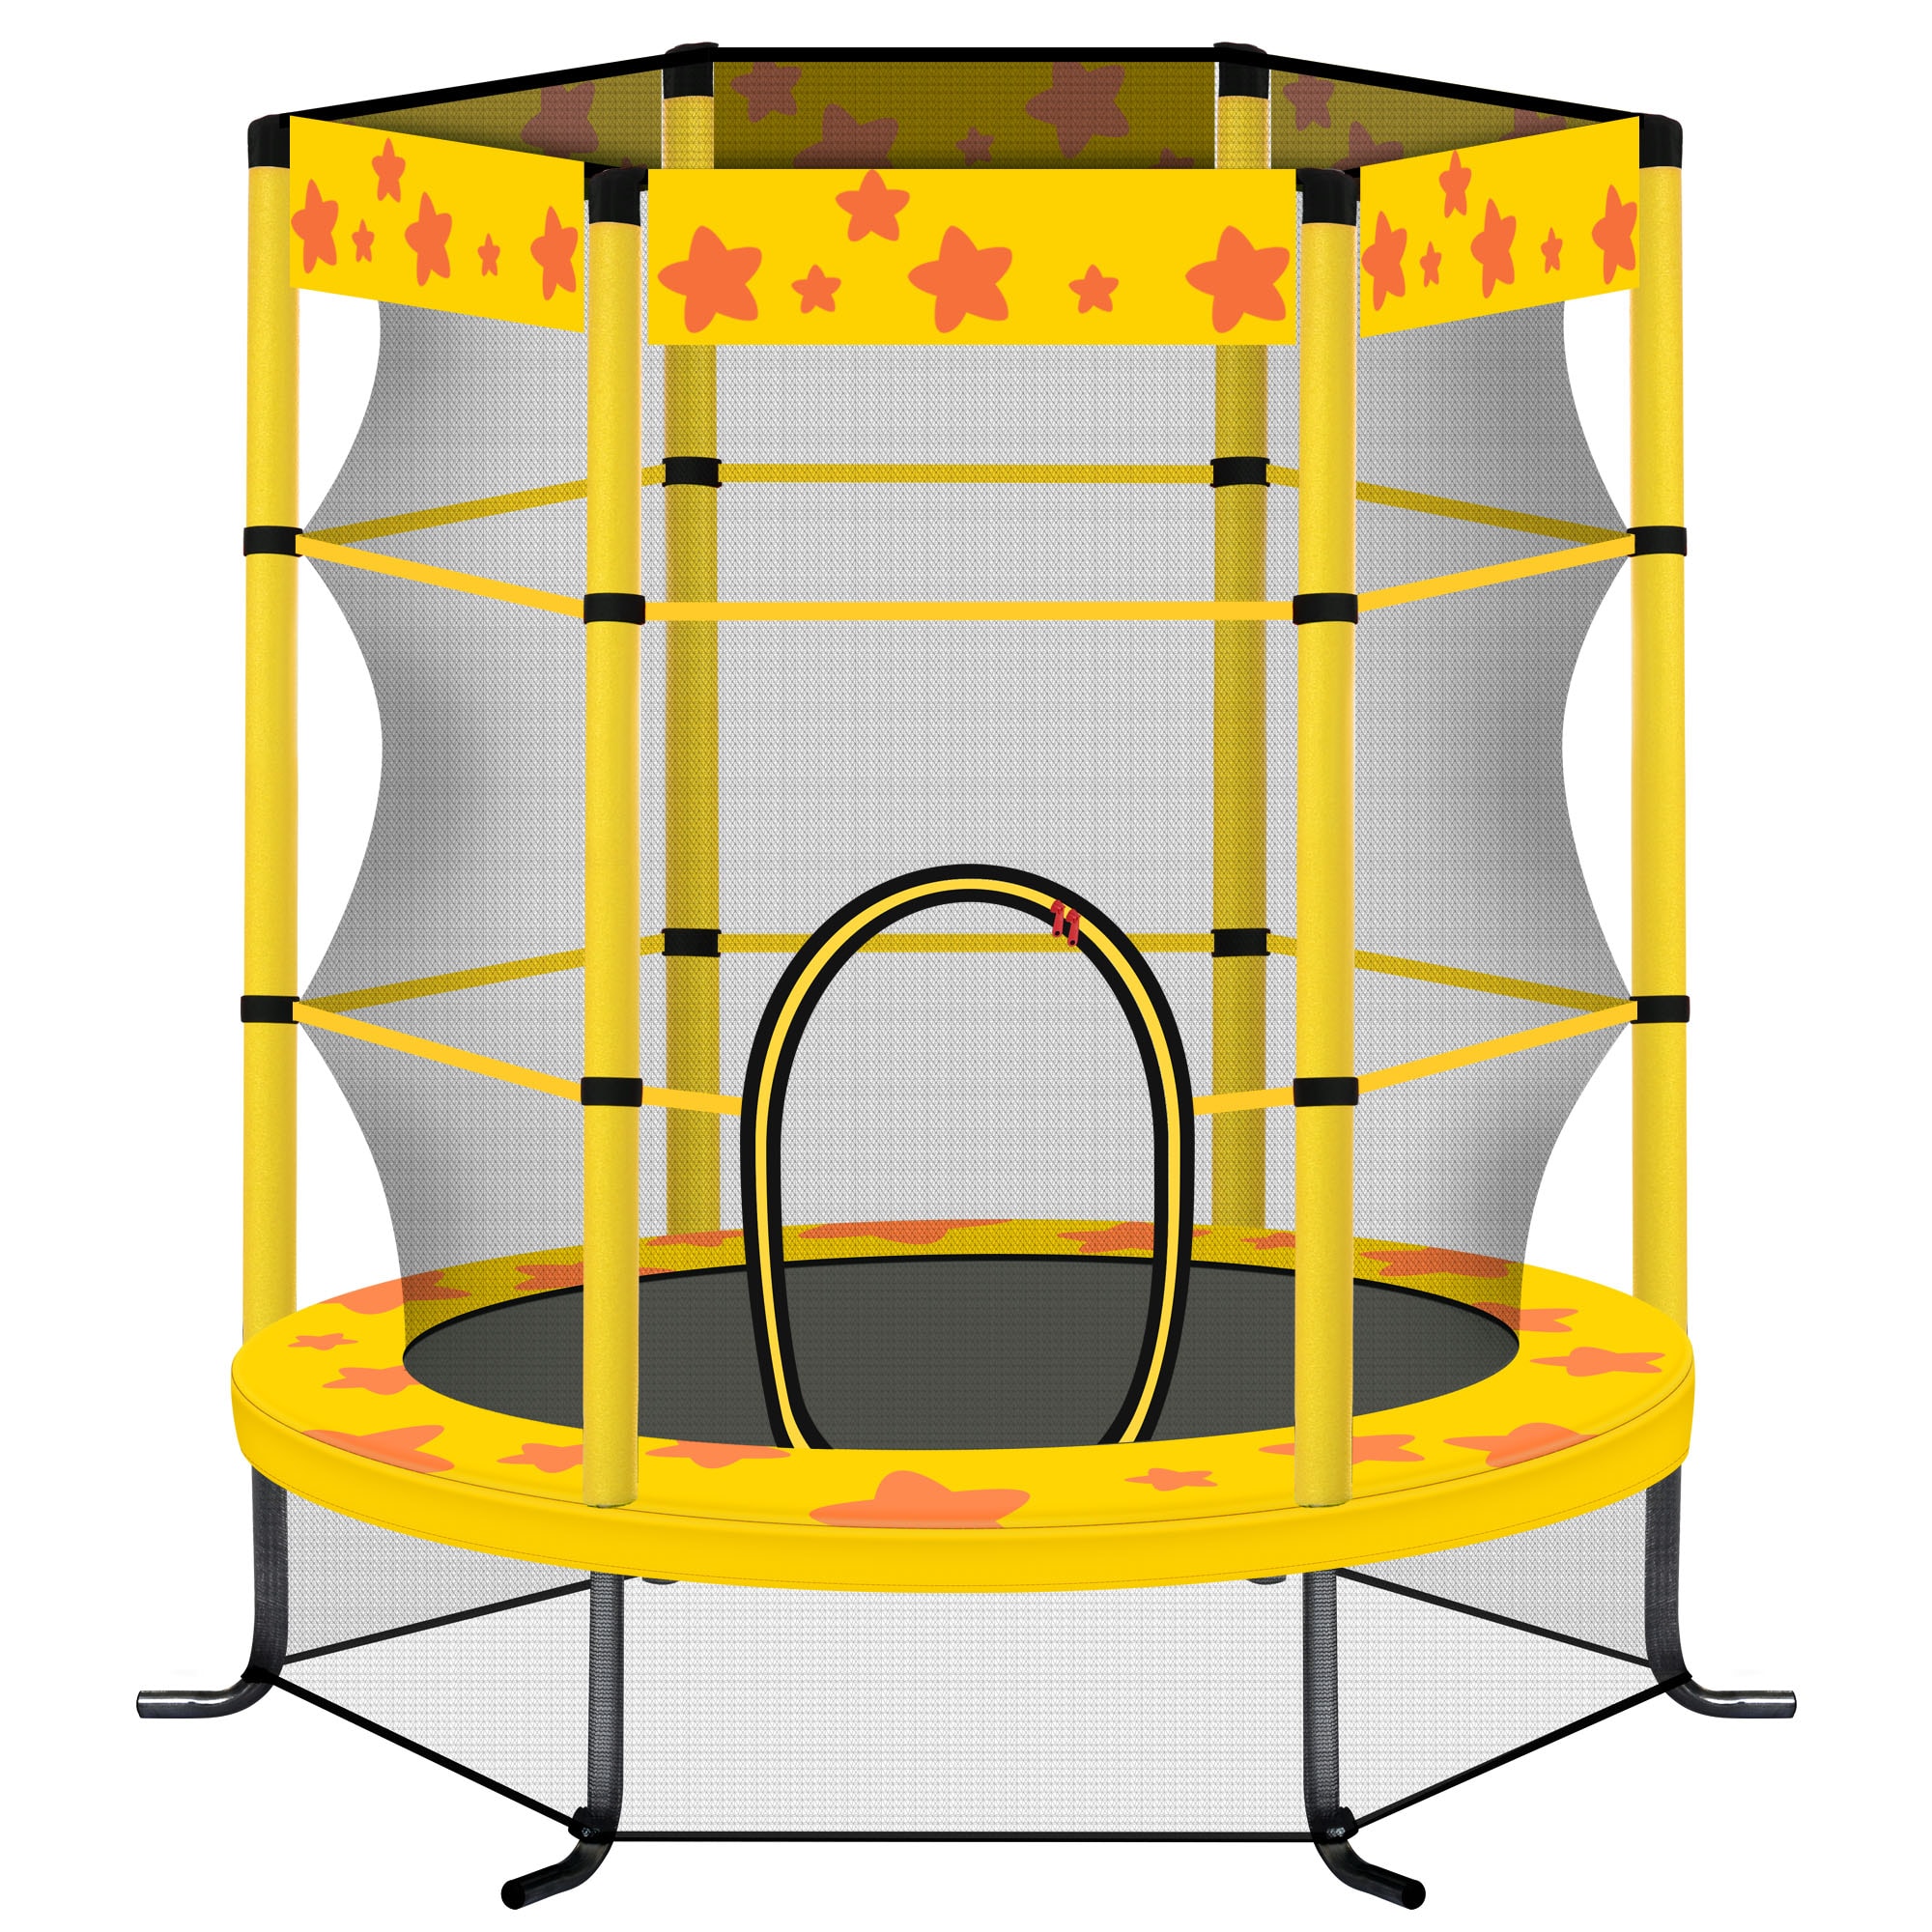 100 lb. Weight Capacity Trampolines at